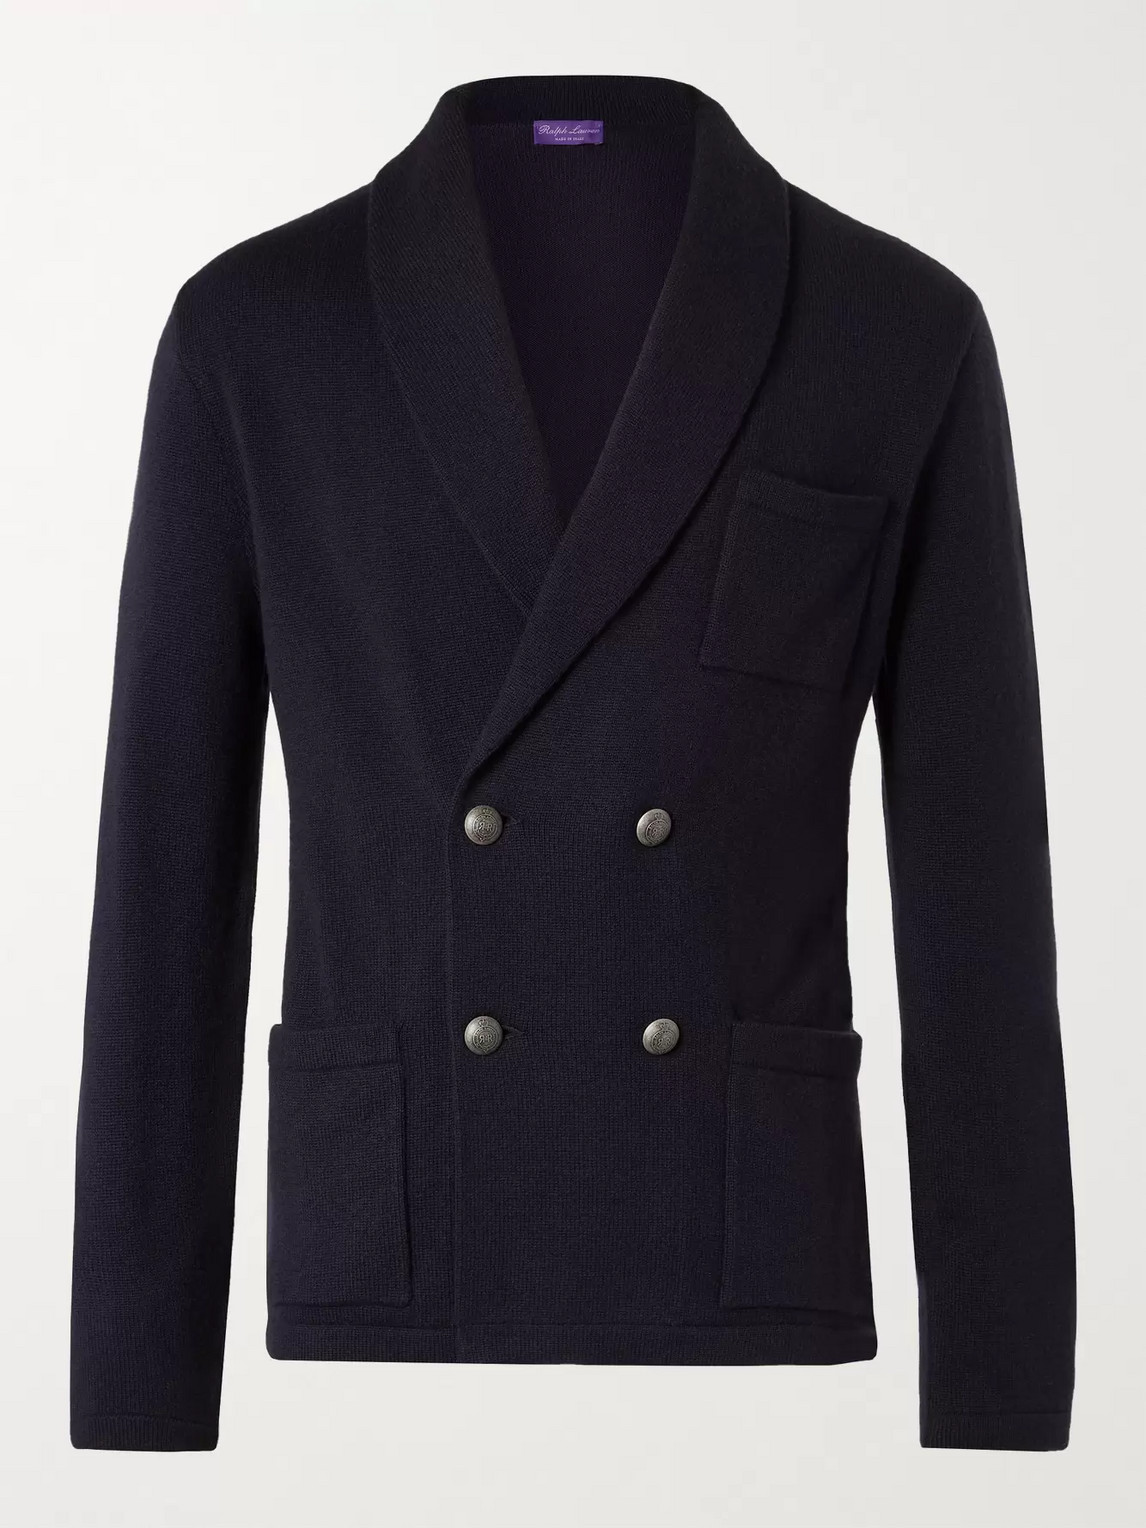 RALPH LAUREN SHAWL-COLLAR DOUBLE-BREASTED CASHMERE CARDIGAN